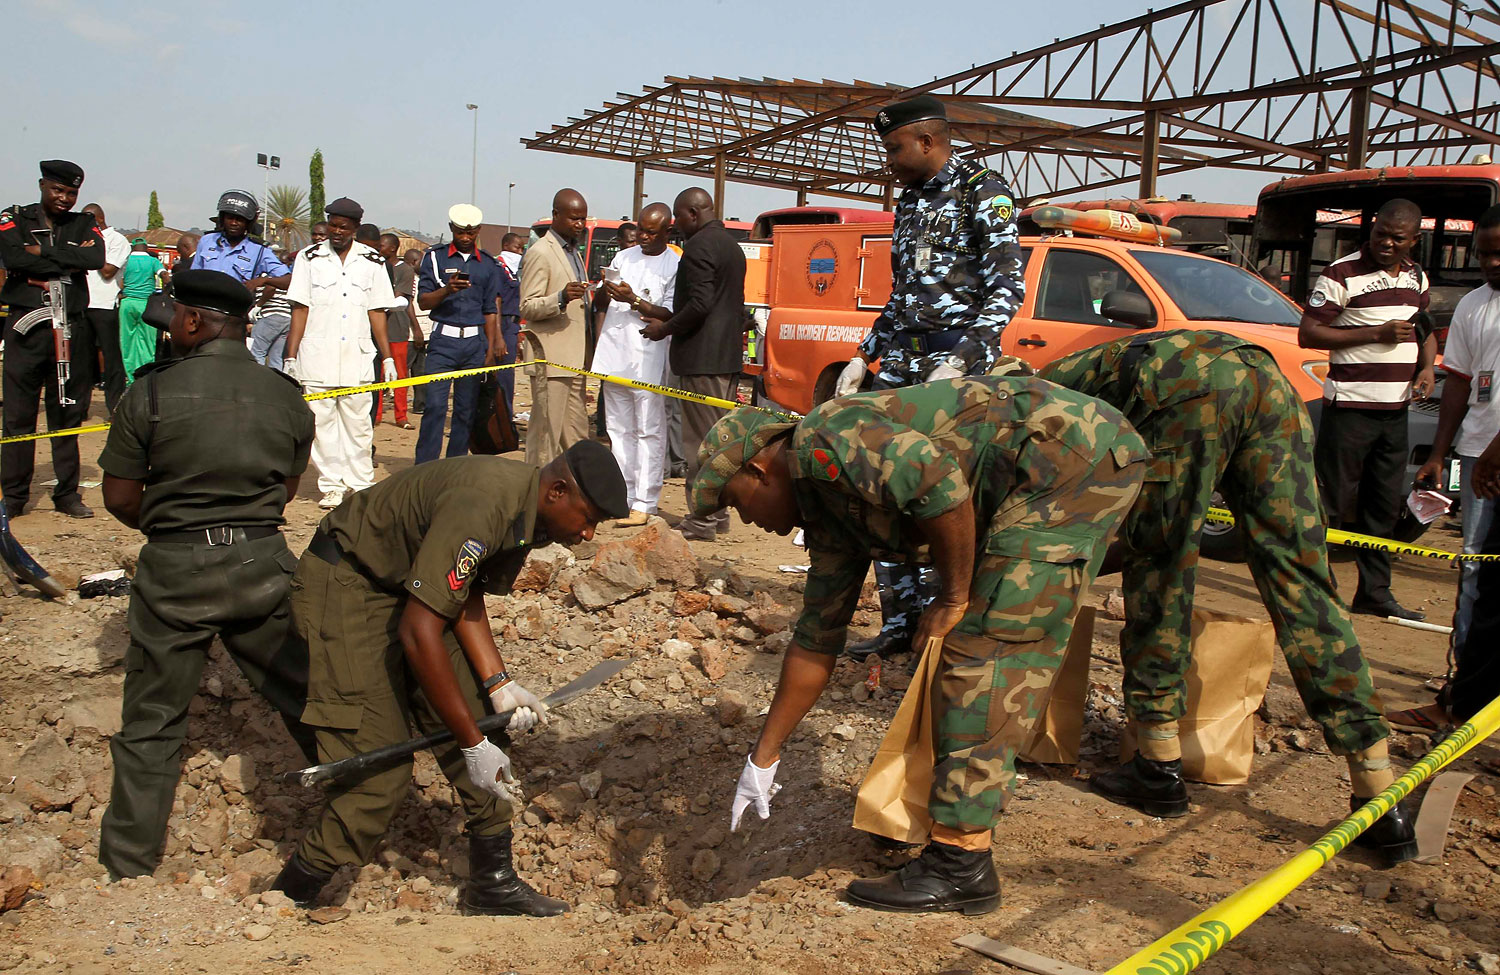 Bomb experts gather evidence at the scene of a bomb blast at Nyanyan in Abuja April 14, 2014.